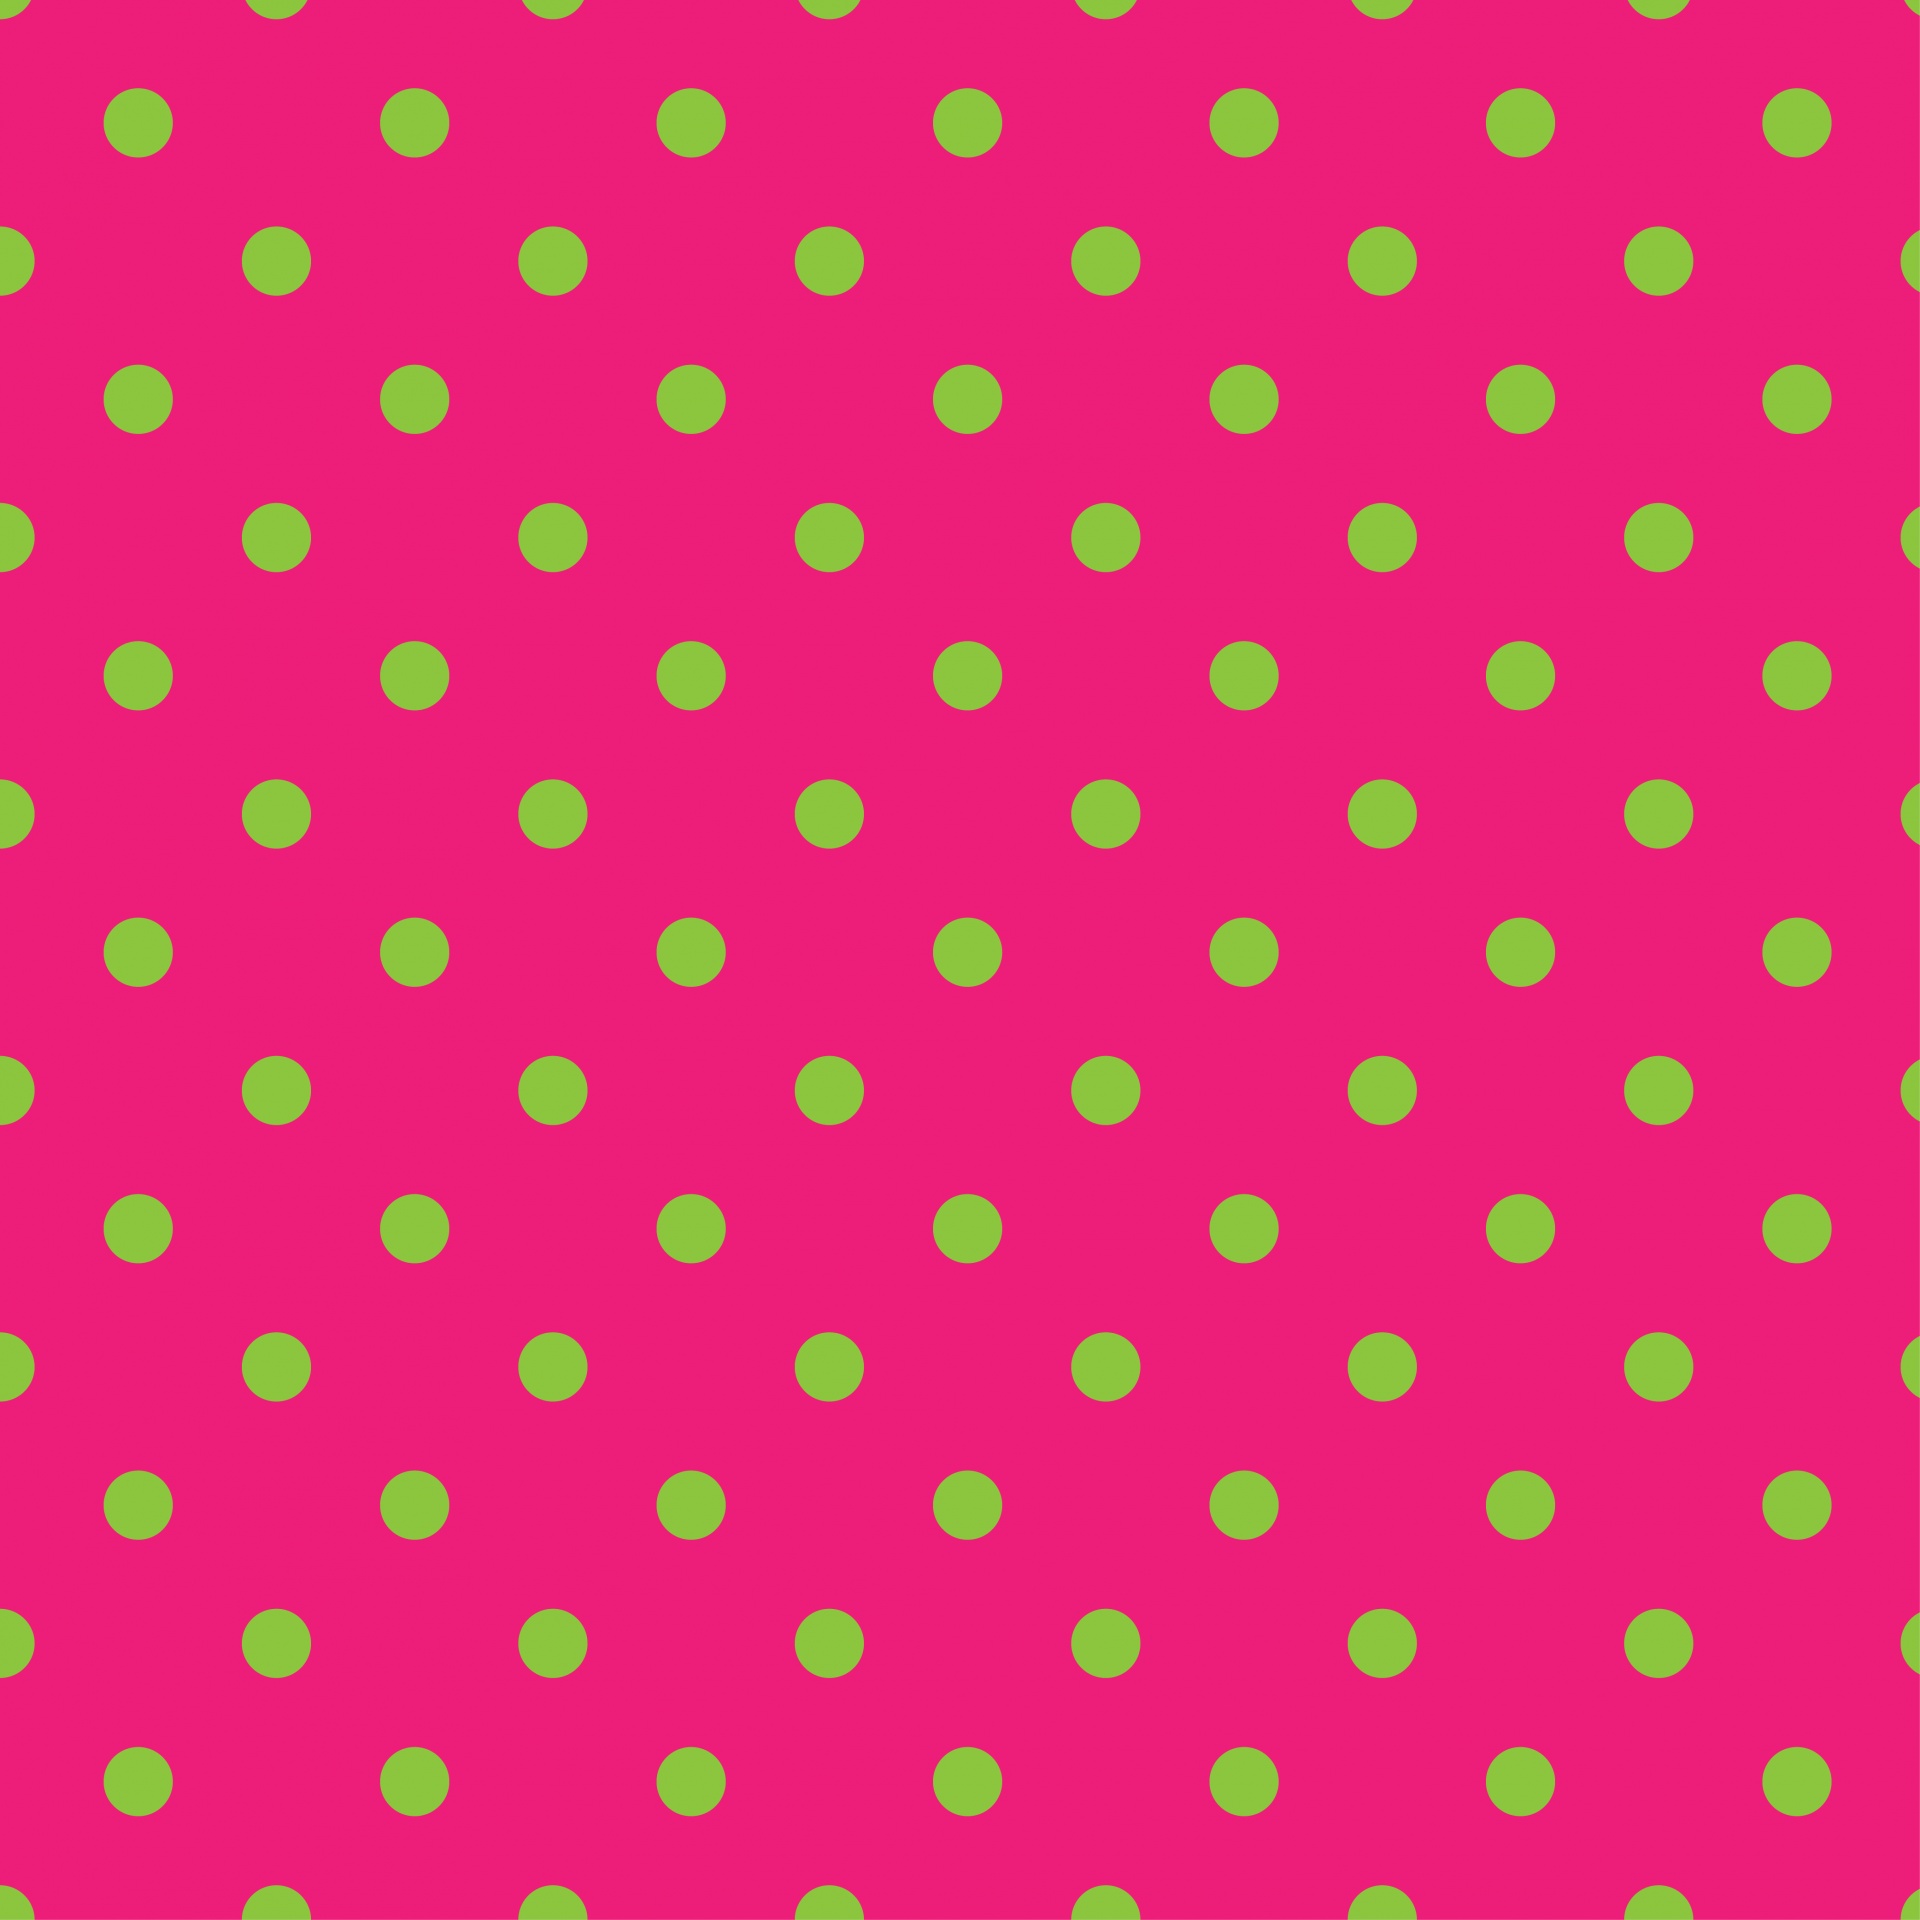 Seamless background of pink and green polka dots pattern